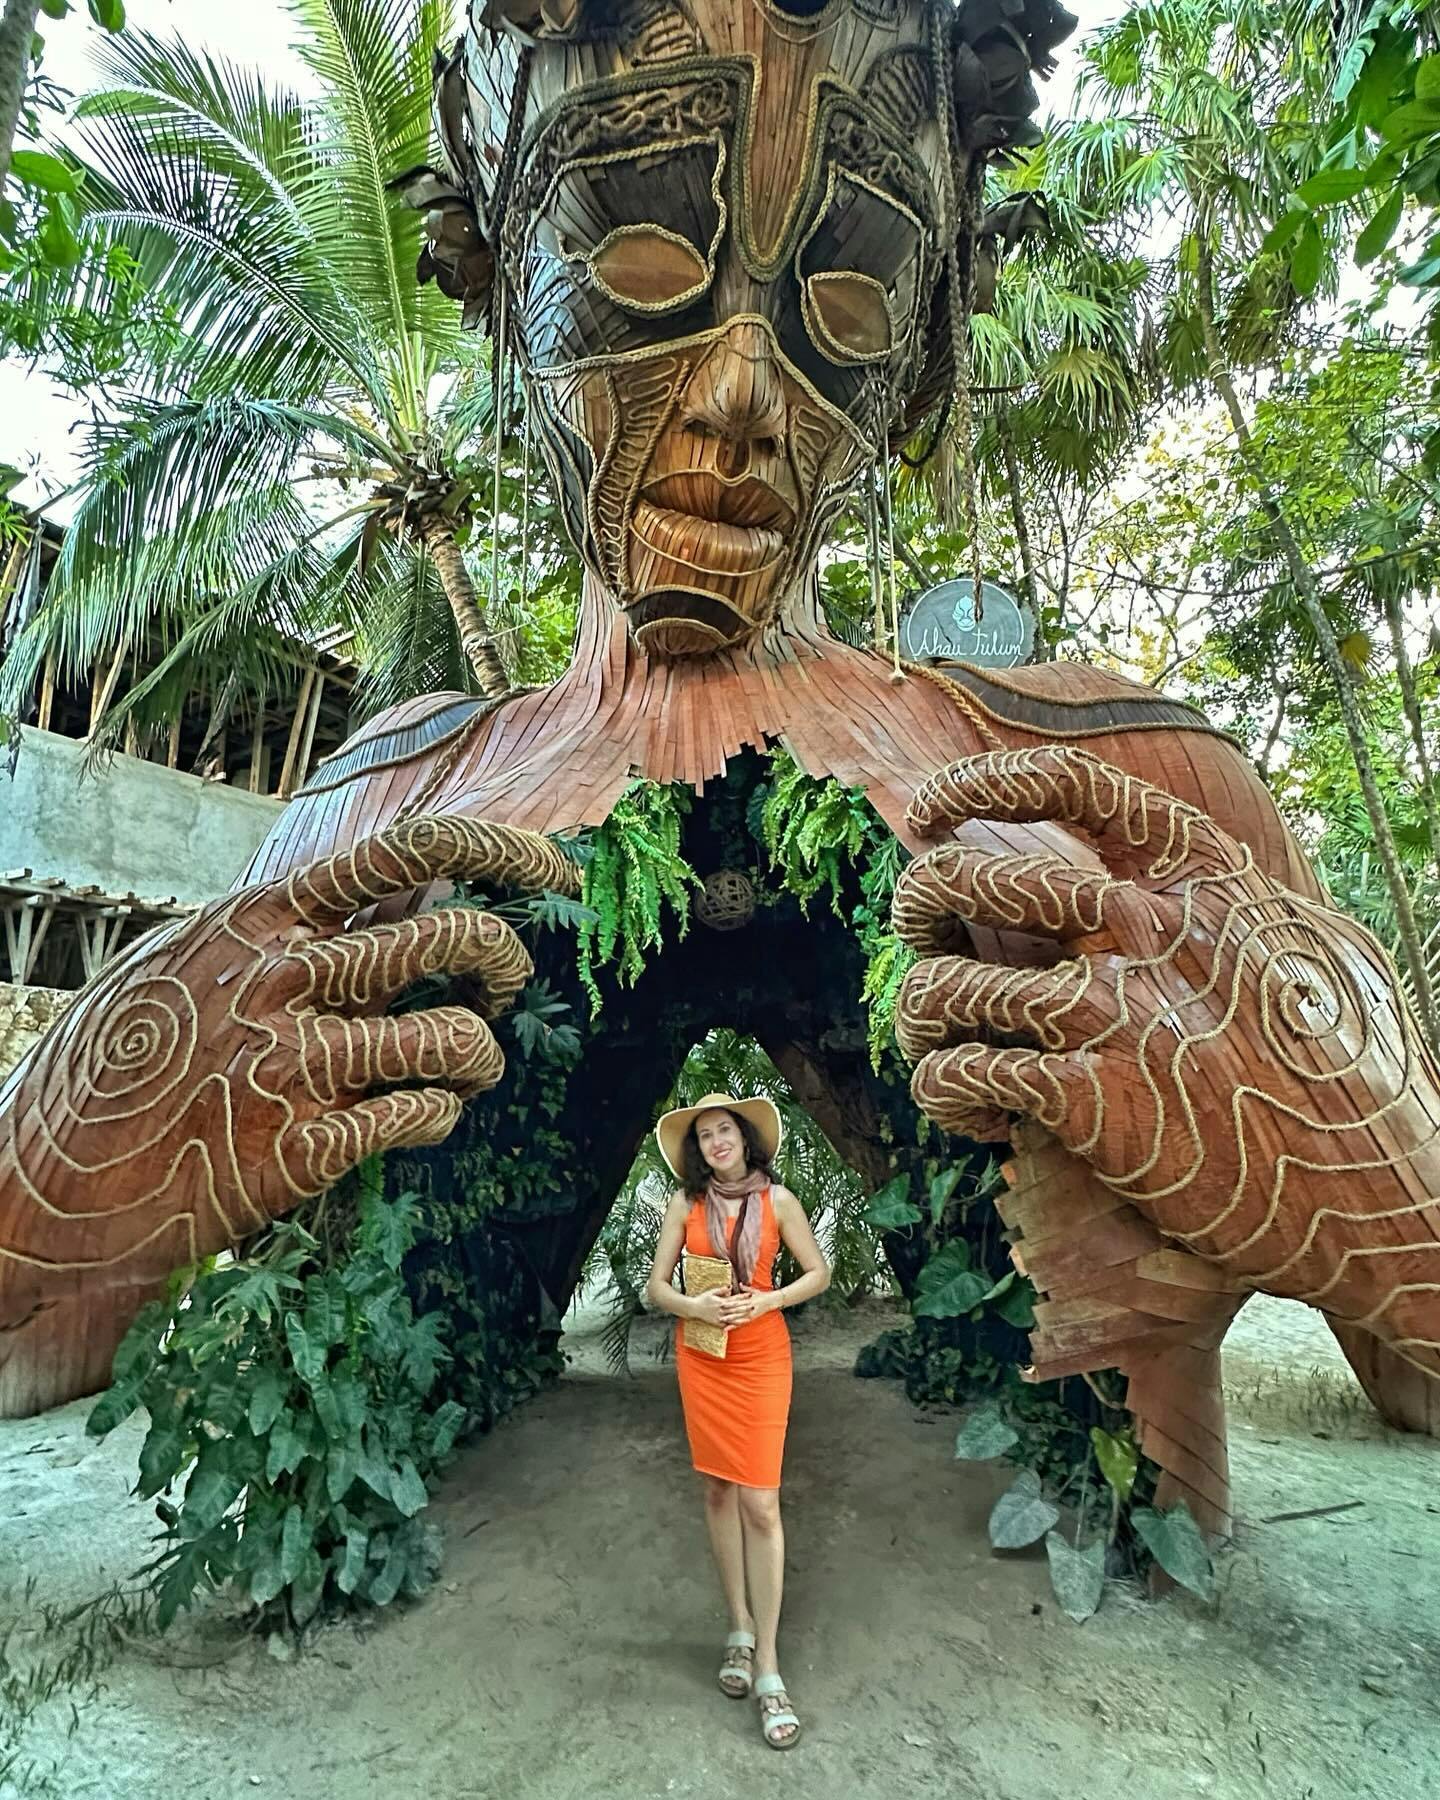 Spread your wings and let your heart lead you to your purpose ❤️ 

#tulummexico #venalaluz #purposedrivenlife #lifepurposecoaching #tulumvibes #tulum #mexico